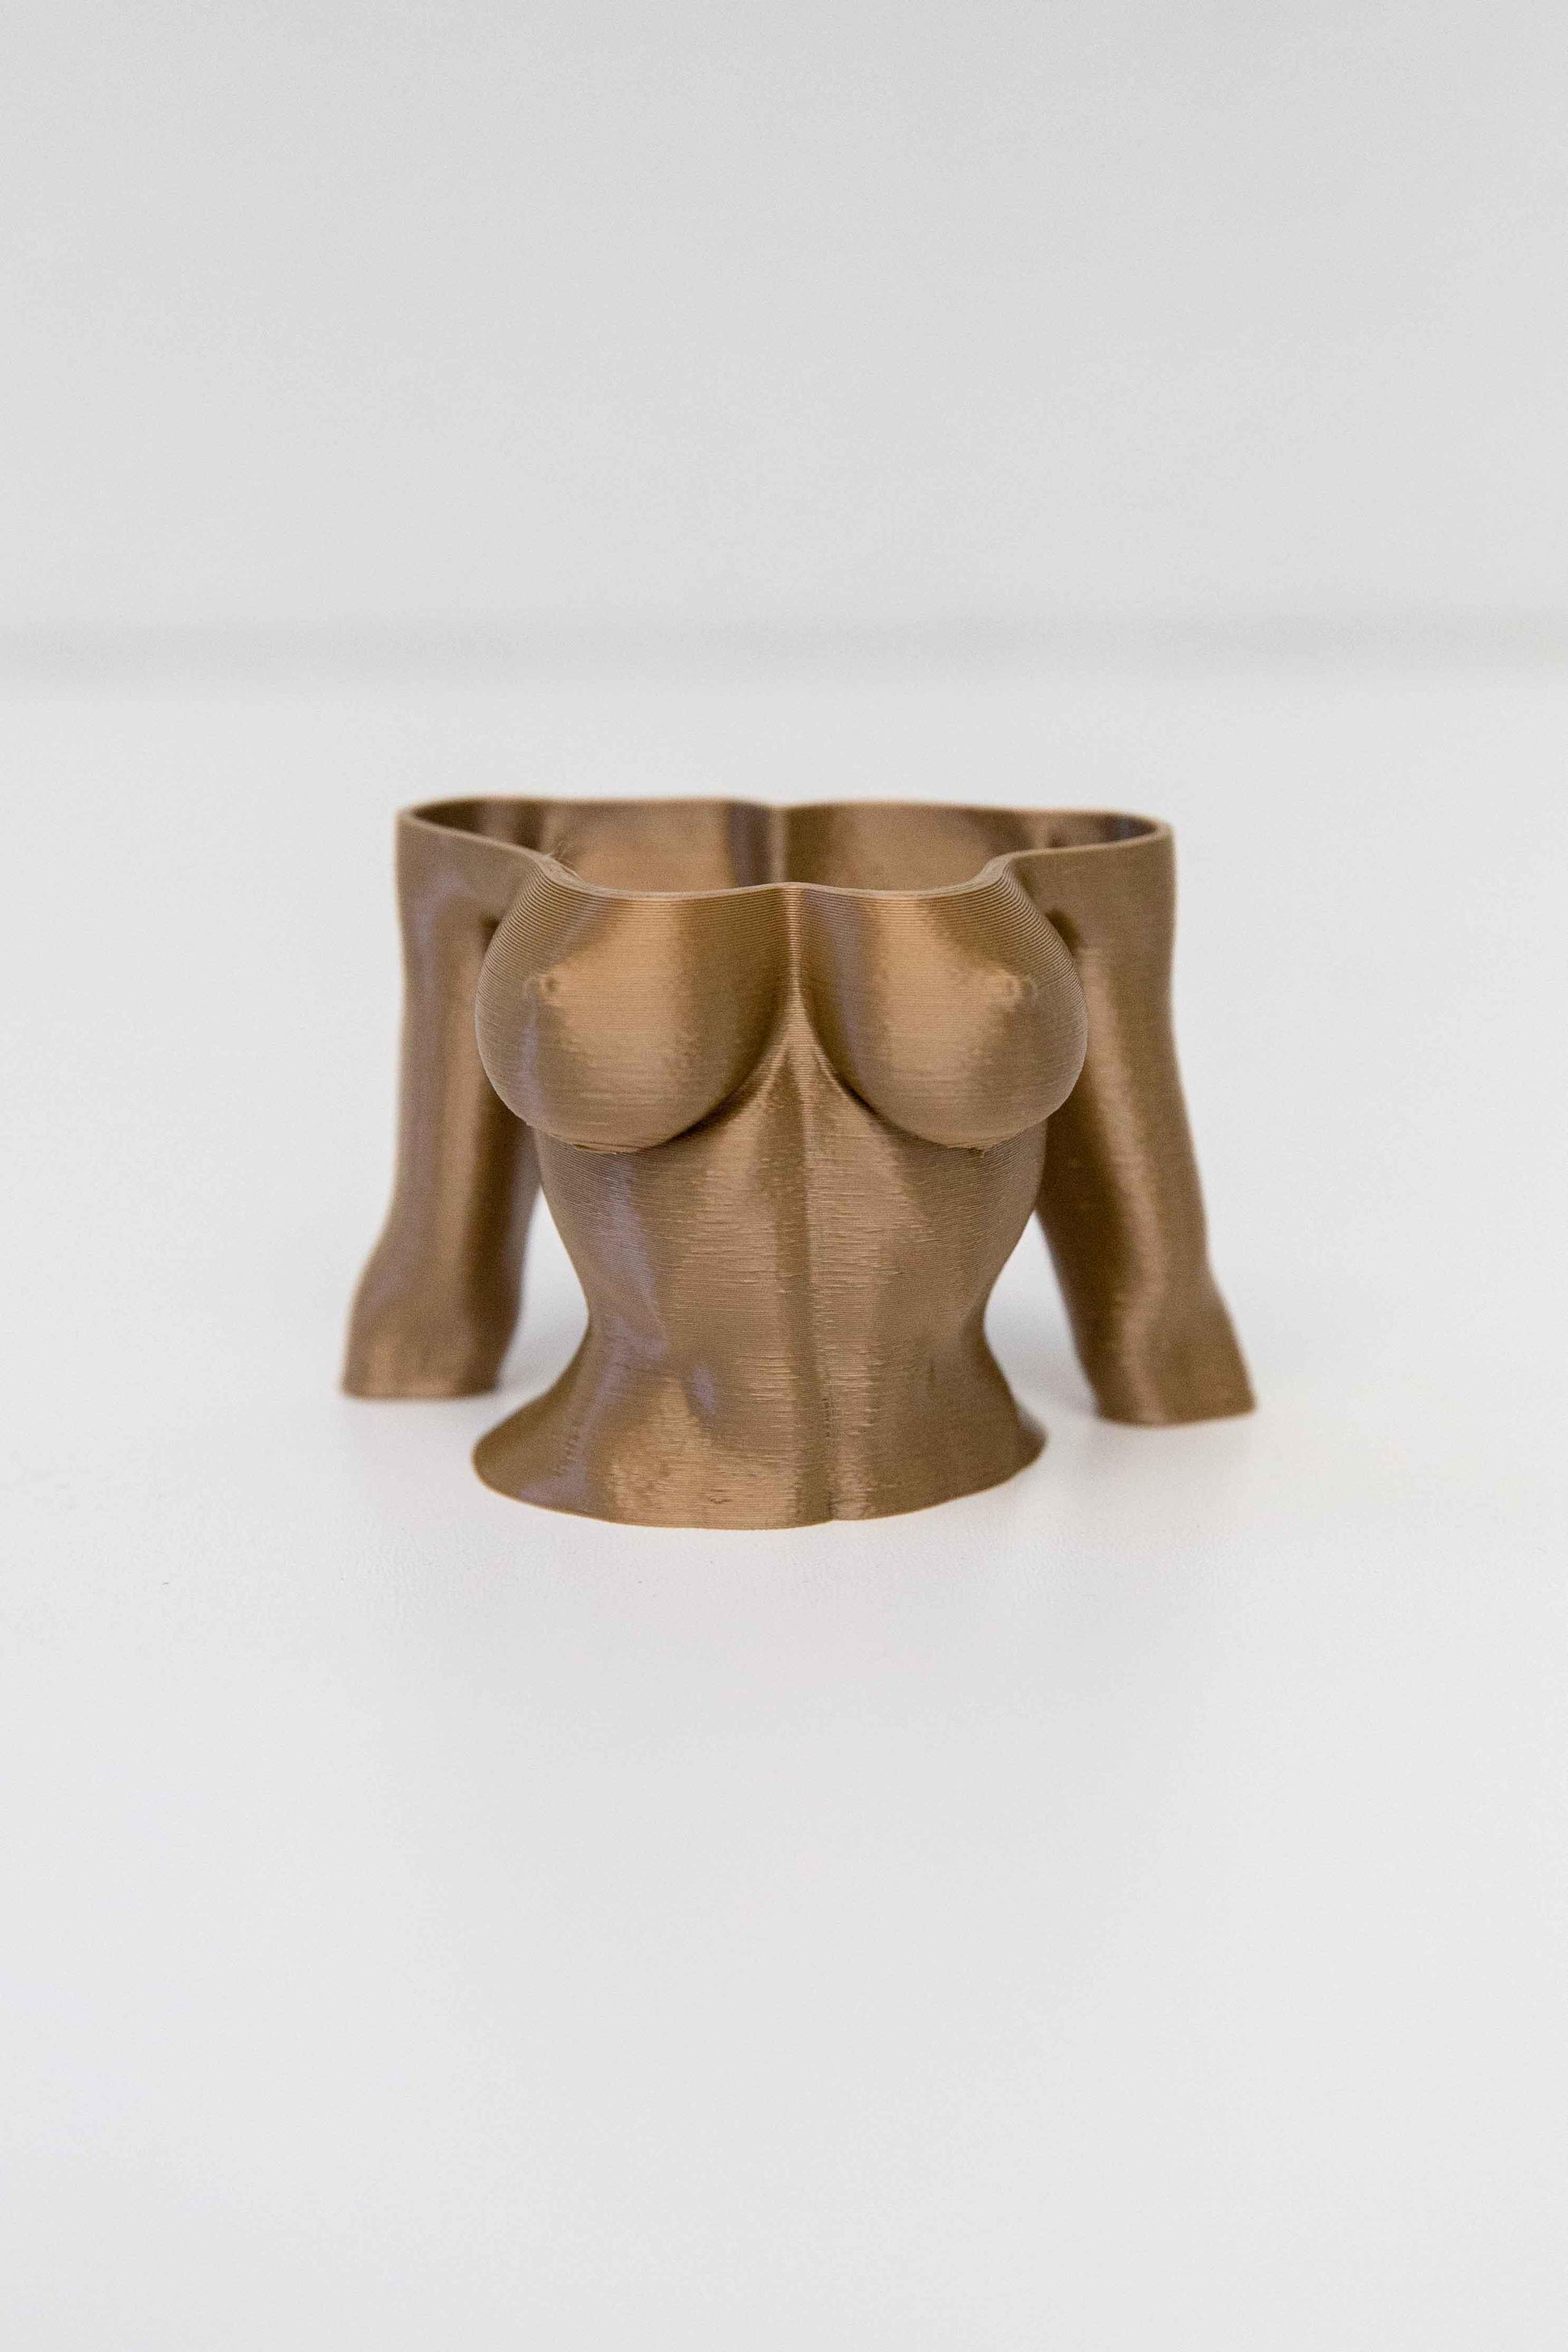 The Muscle Torso - Body Vase